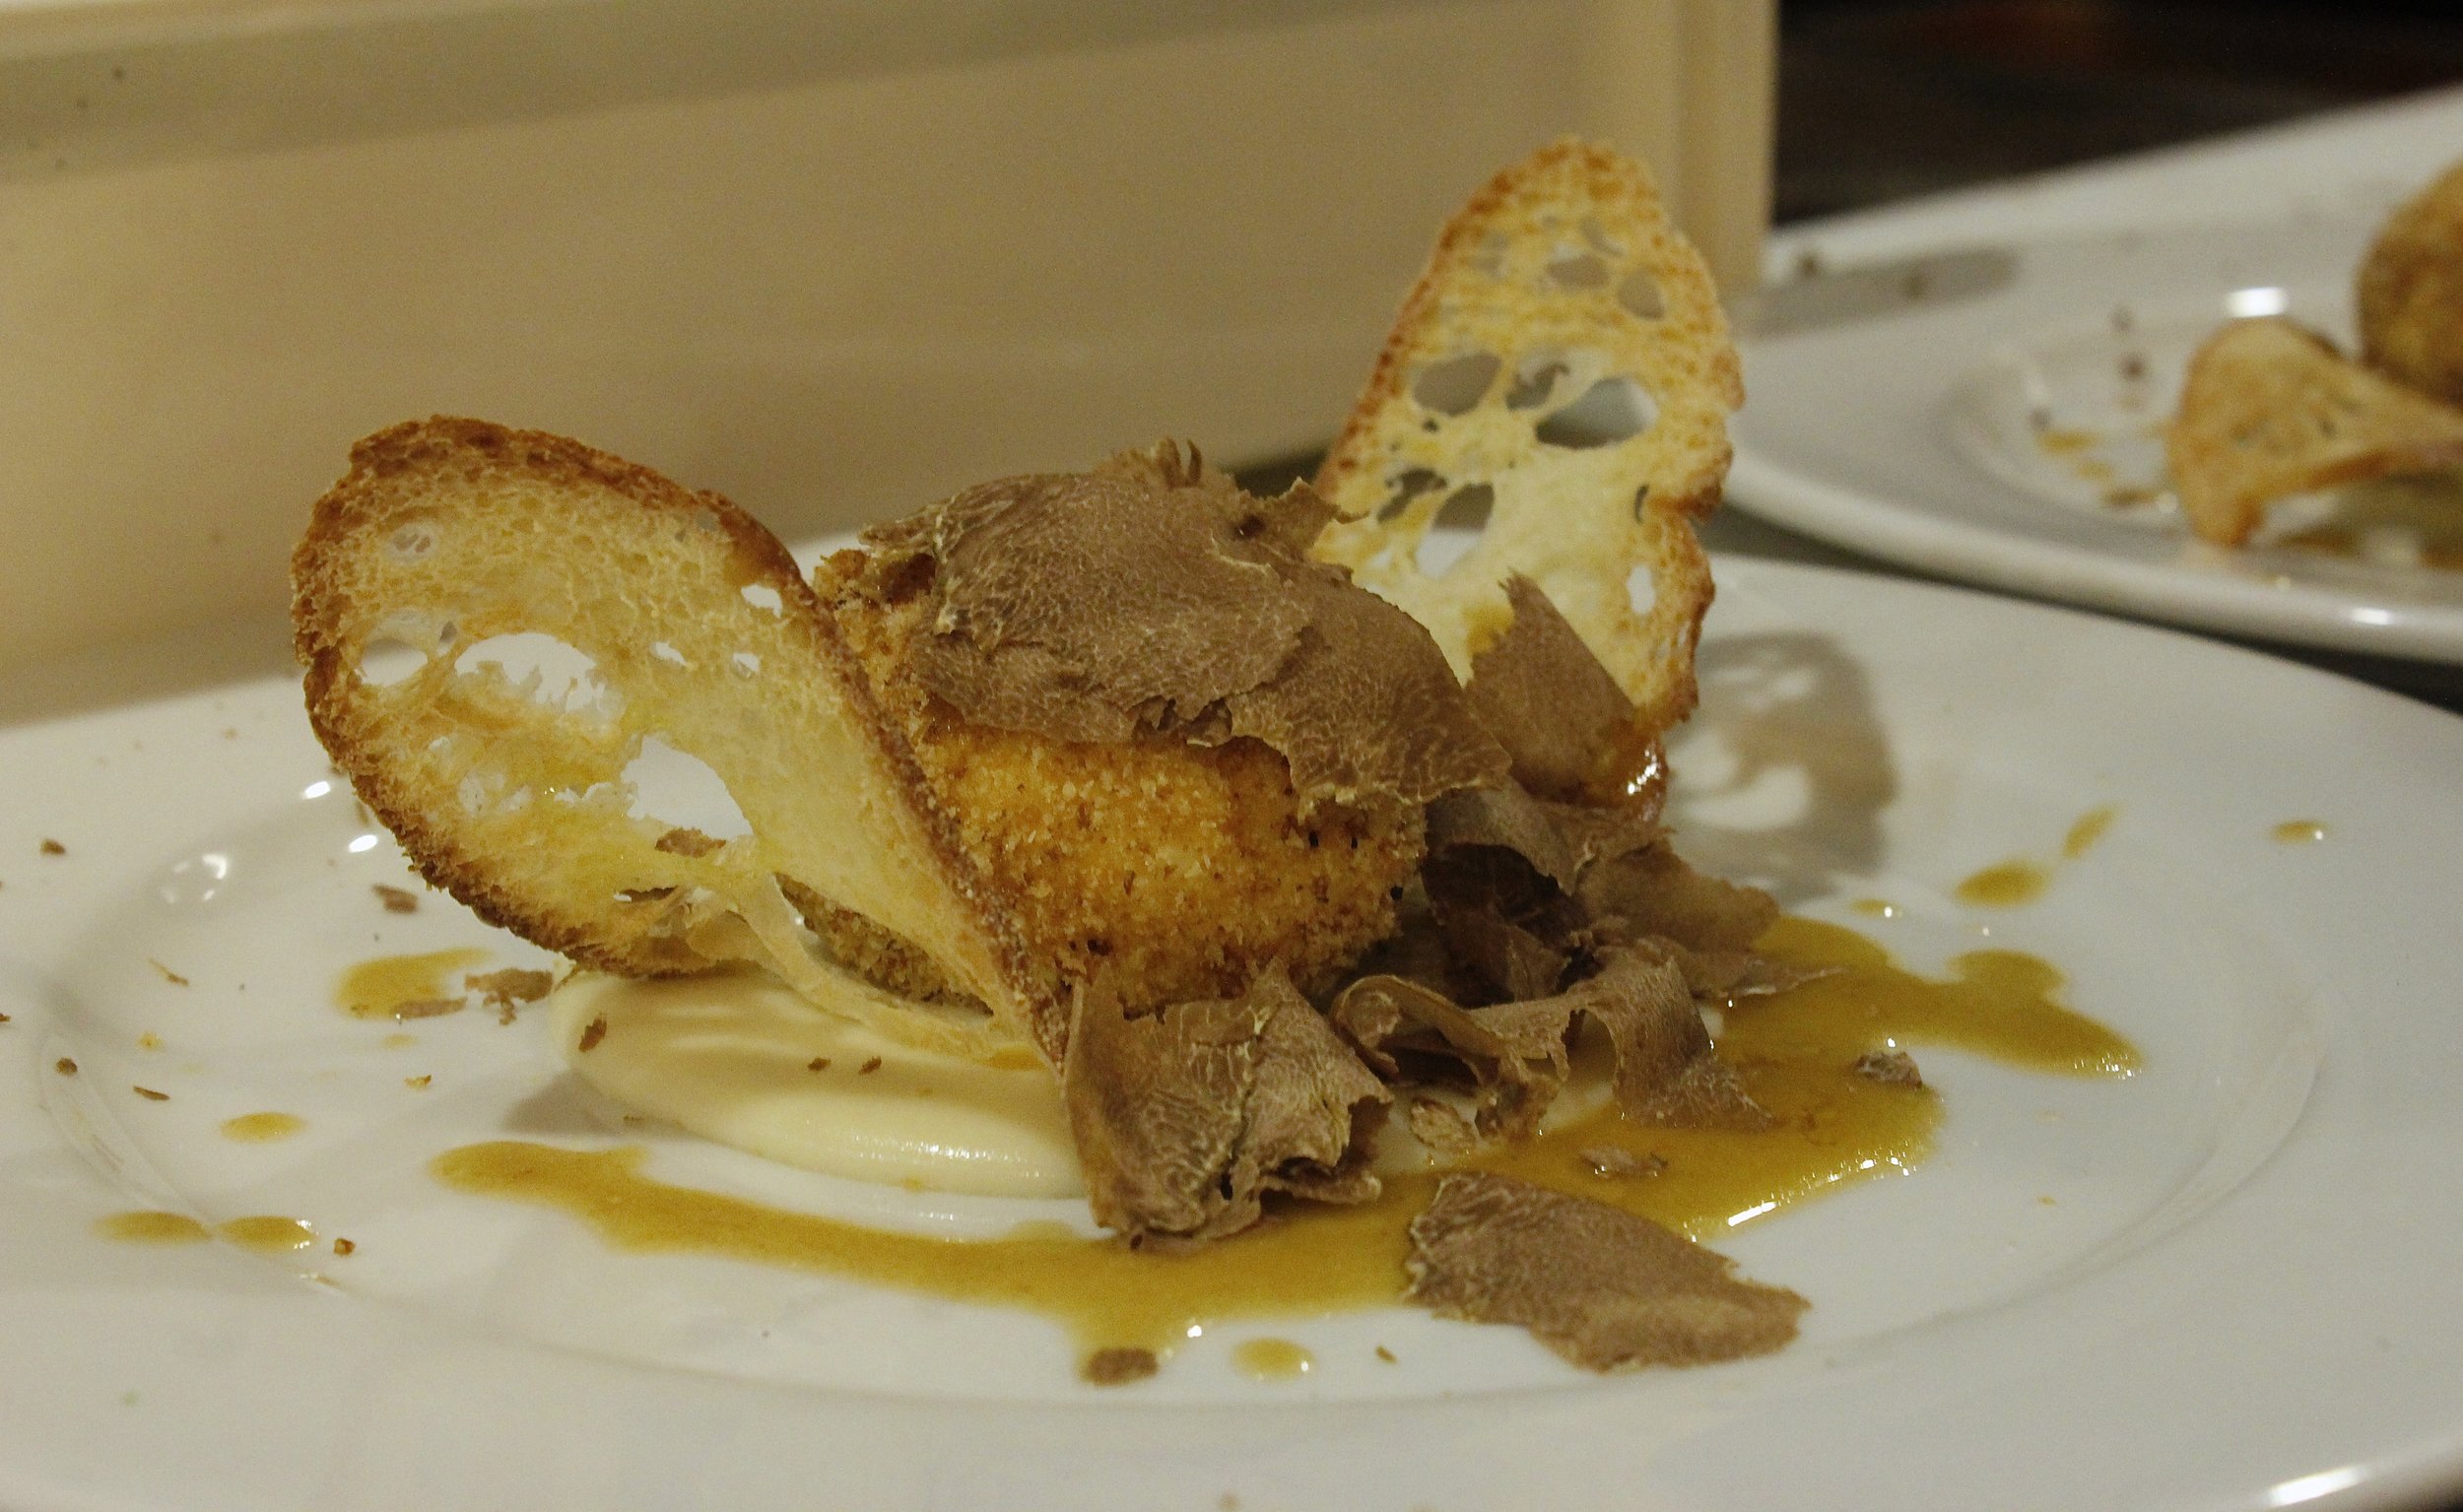  picture of cooked egg dish with truffle 